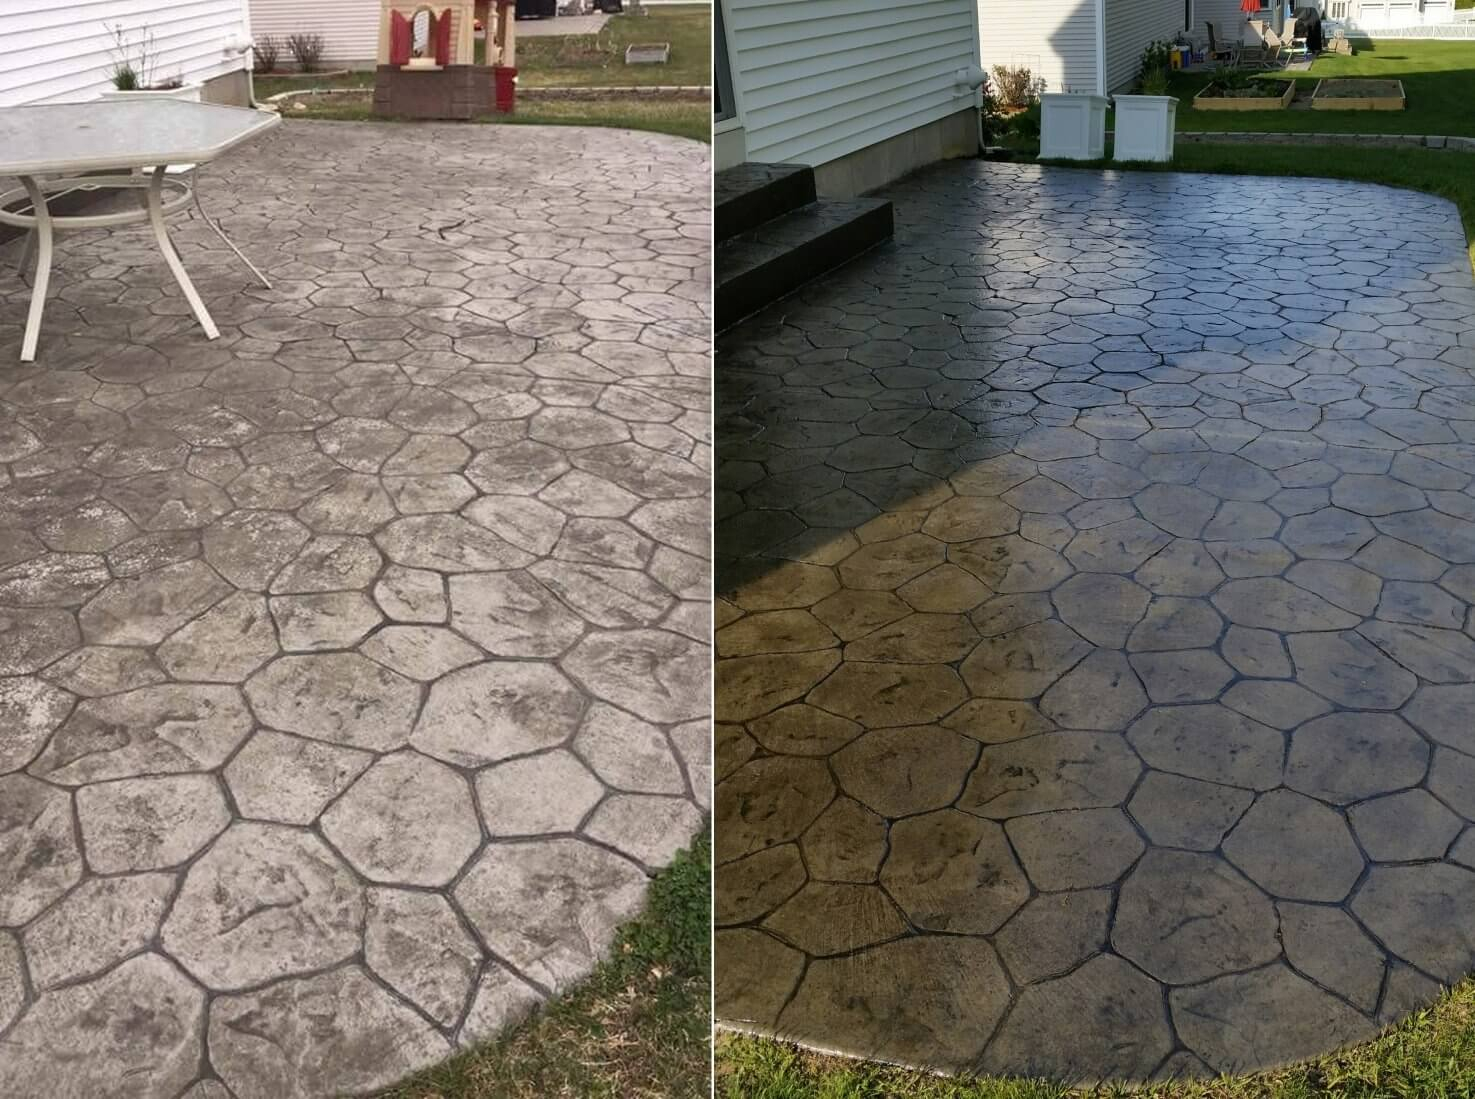 Armor Ar350 Solvent Based Acrylic Wet Look Concrete Sealer And Paver in size 1475 X 1099